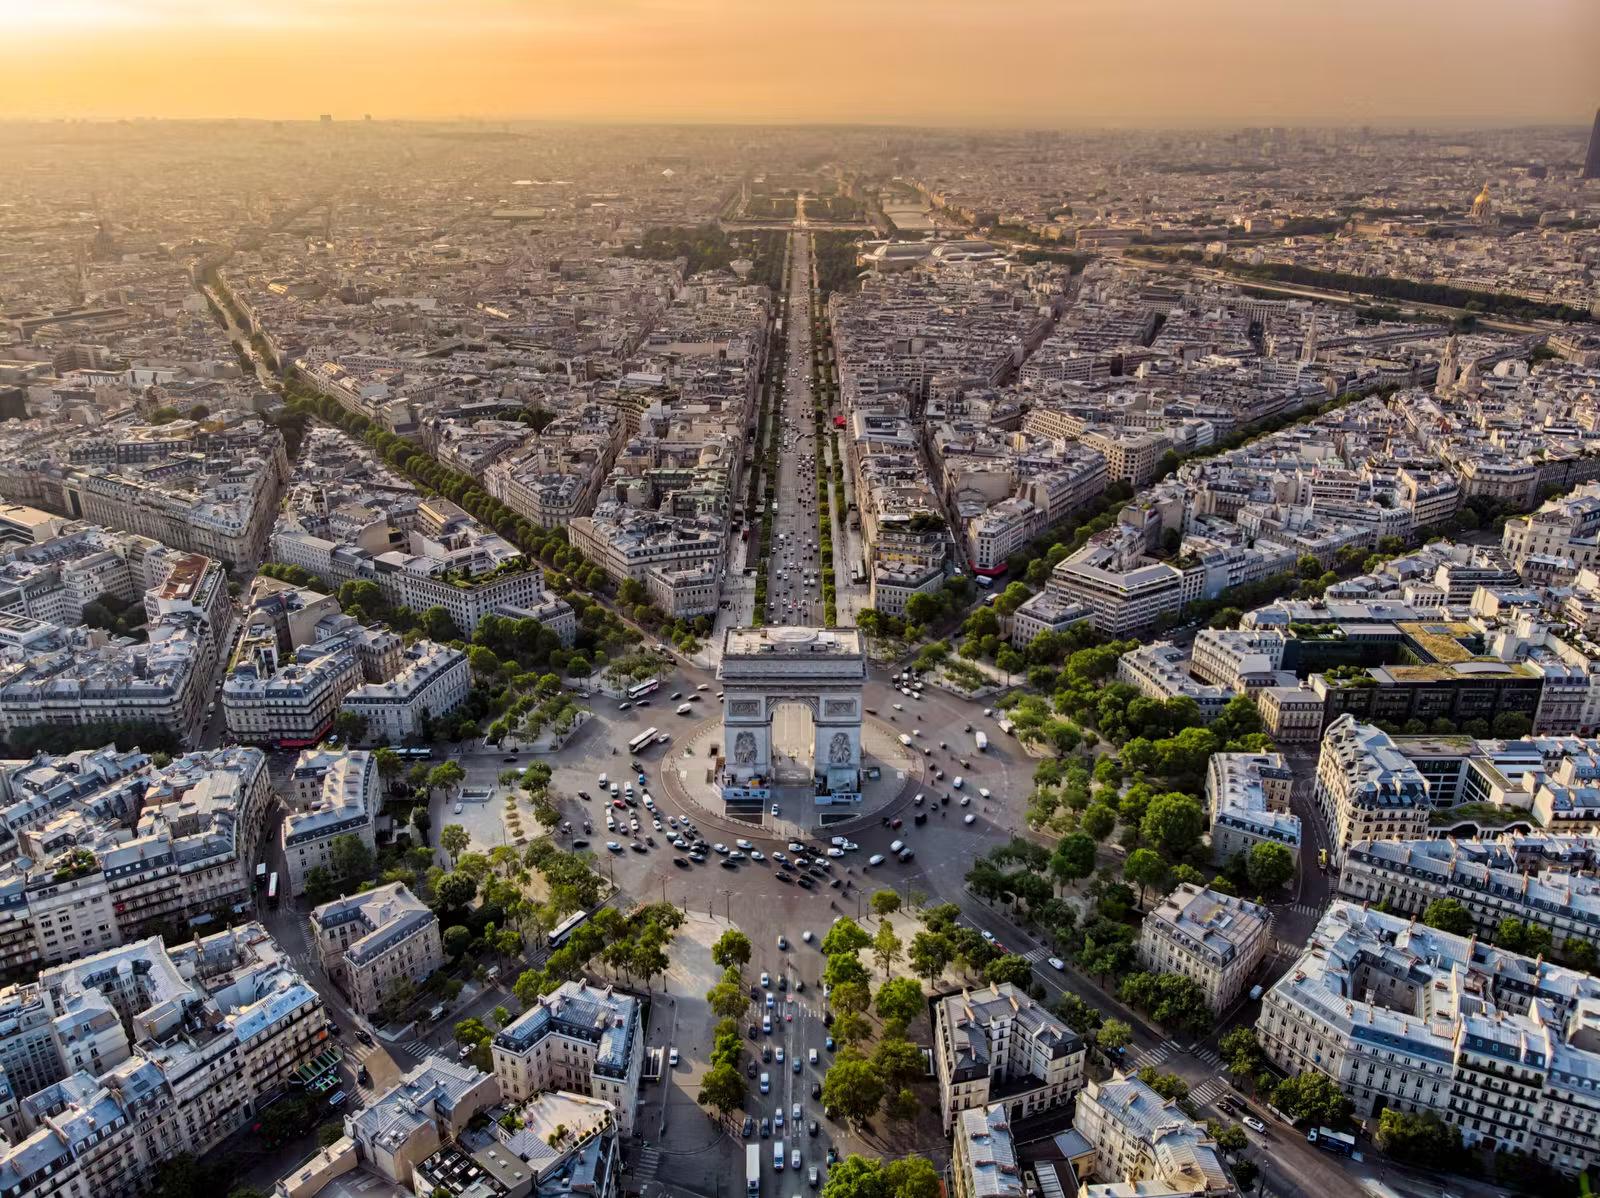 An aerial view over the ornate Arc de Triomphe at sunrise; it sits in the middle of a tree-lined roundabout, with roads radiating out in each direction.